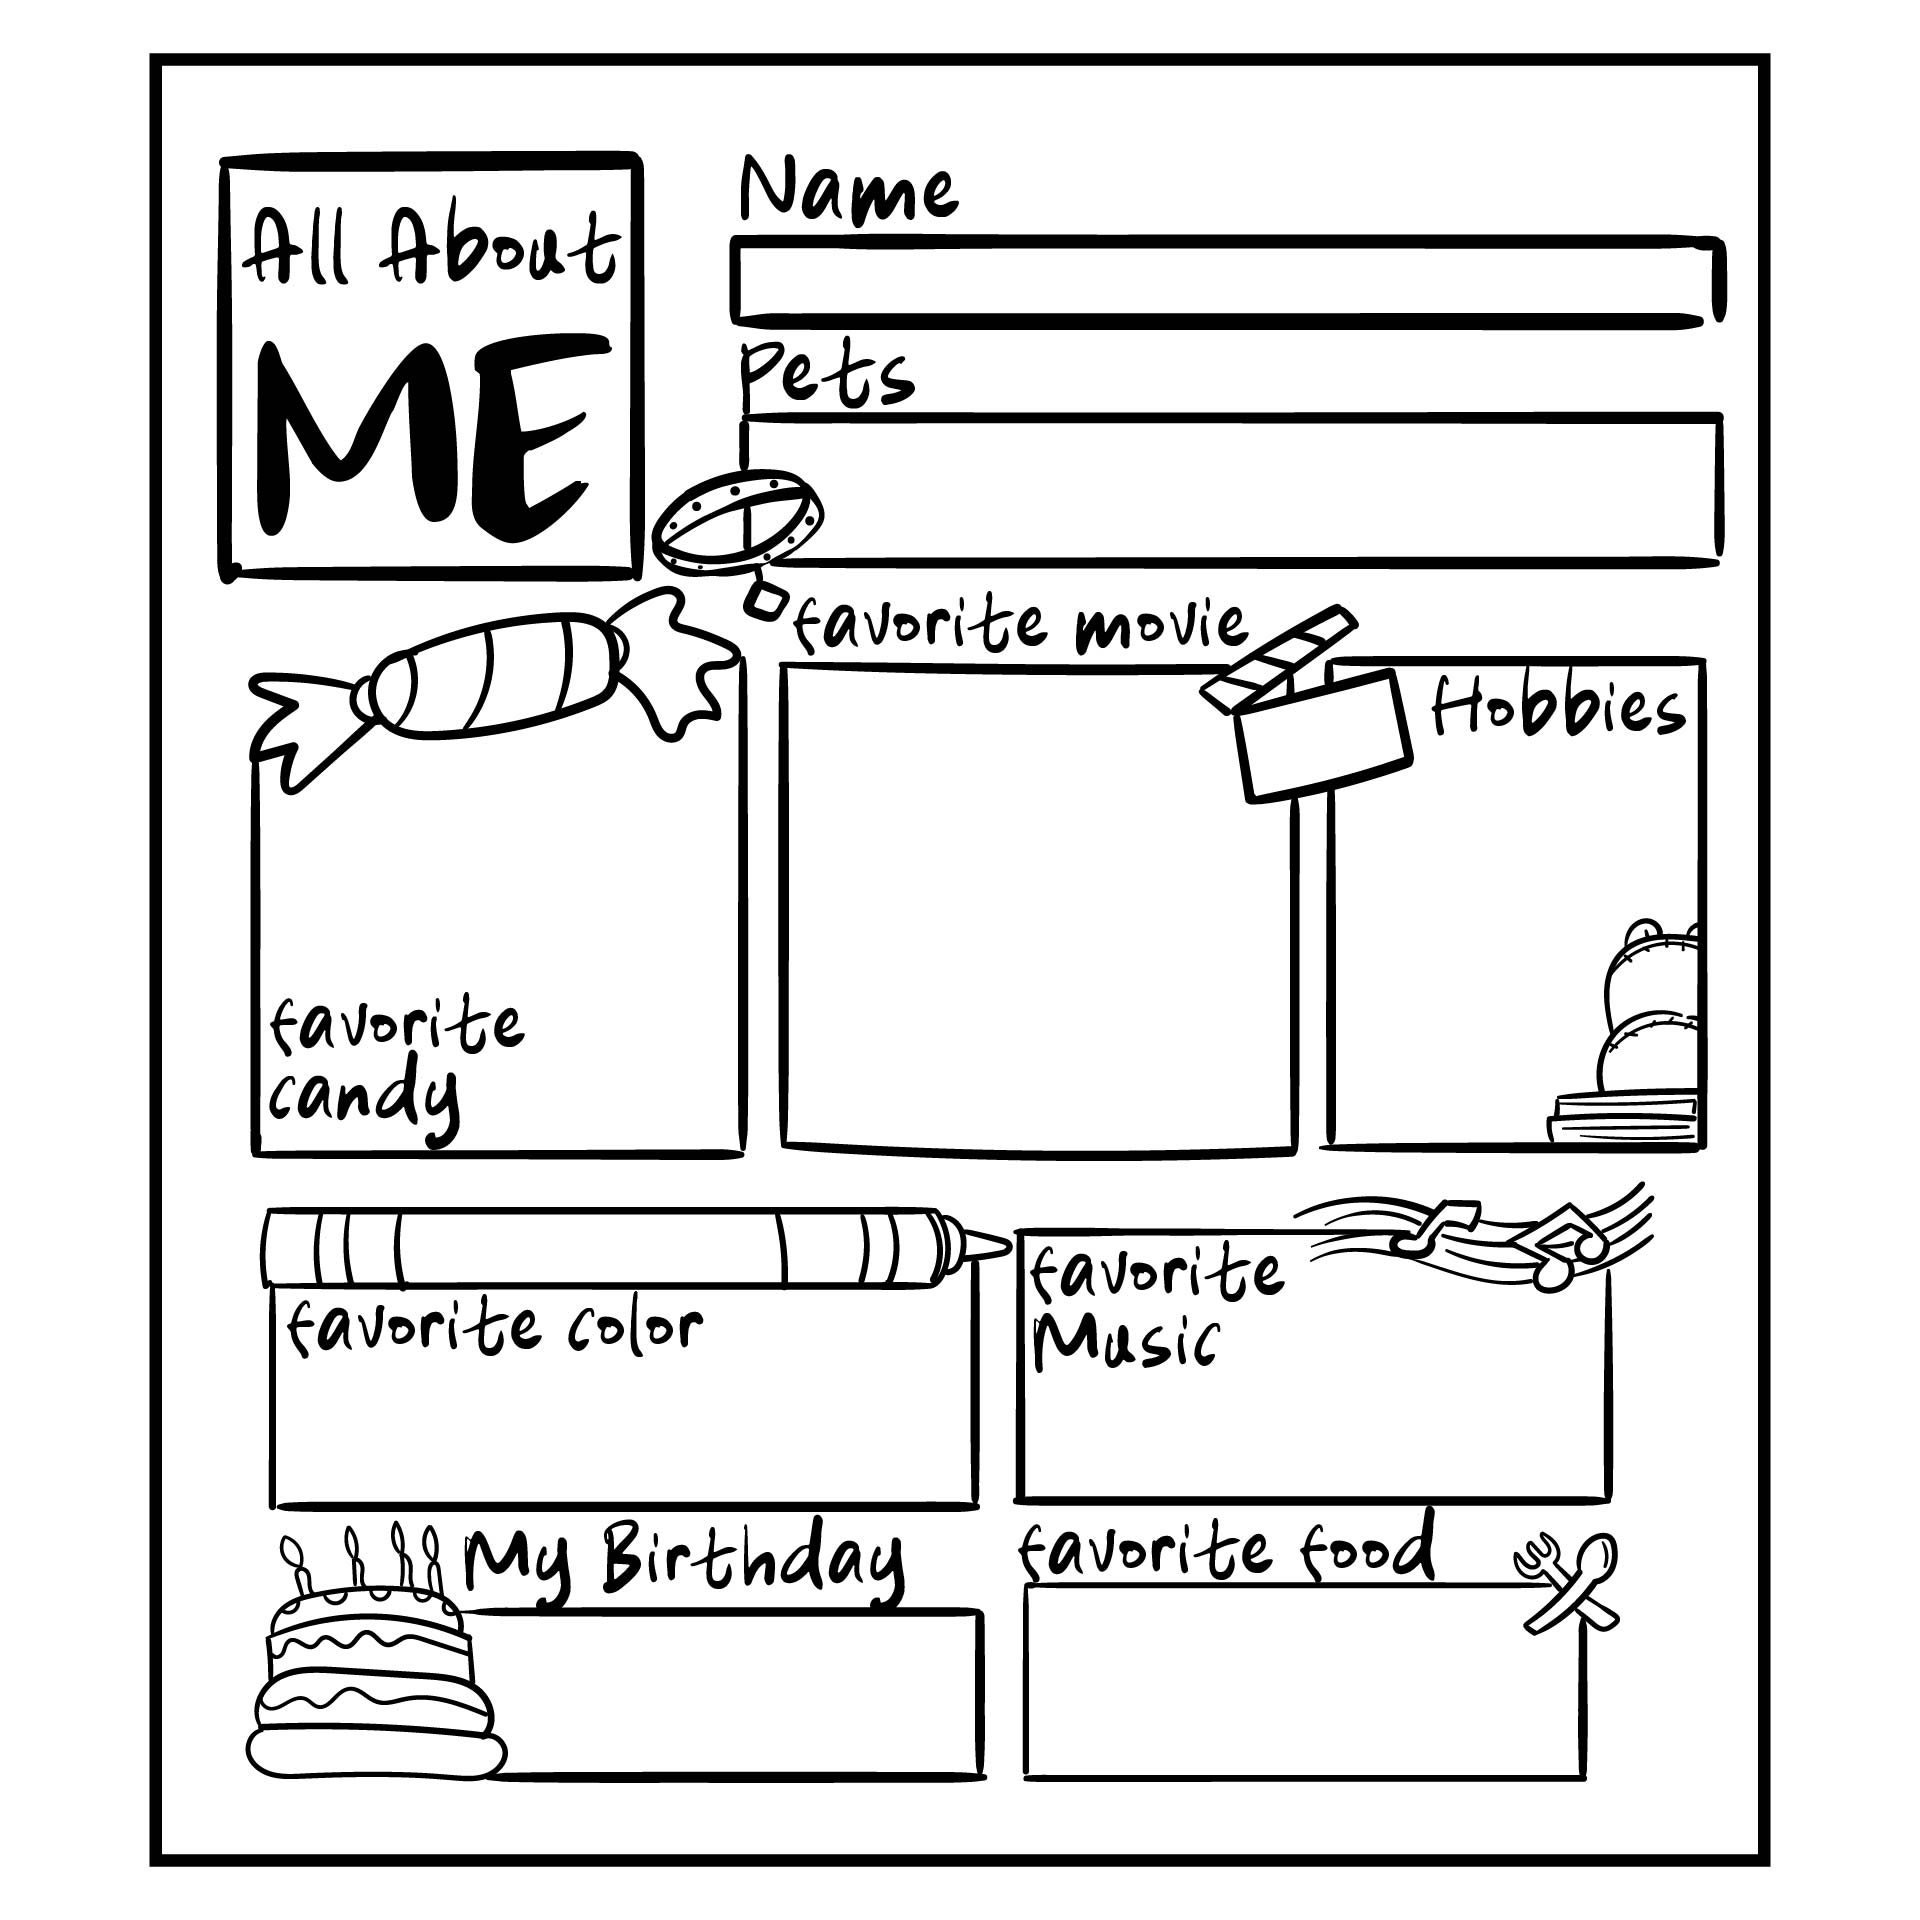 All About Me Template Worksheet